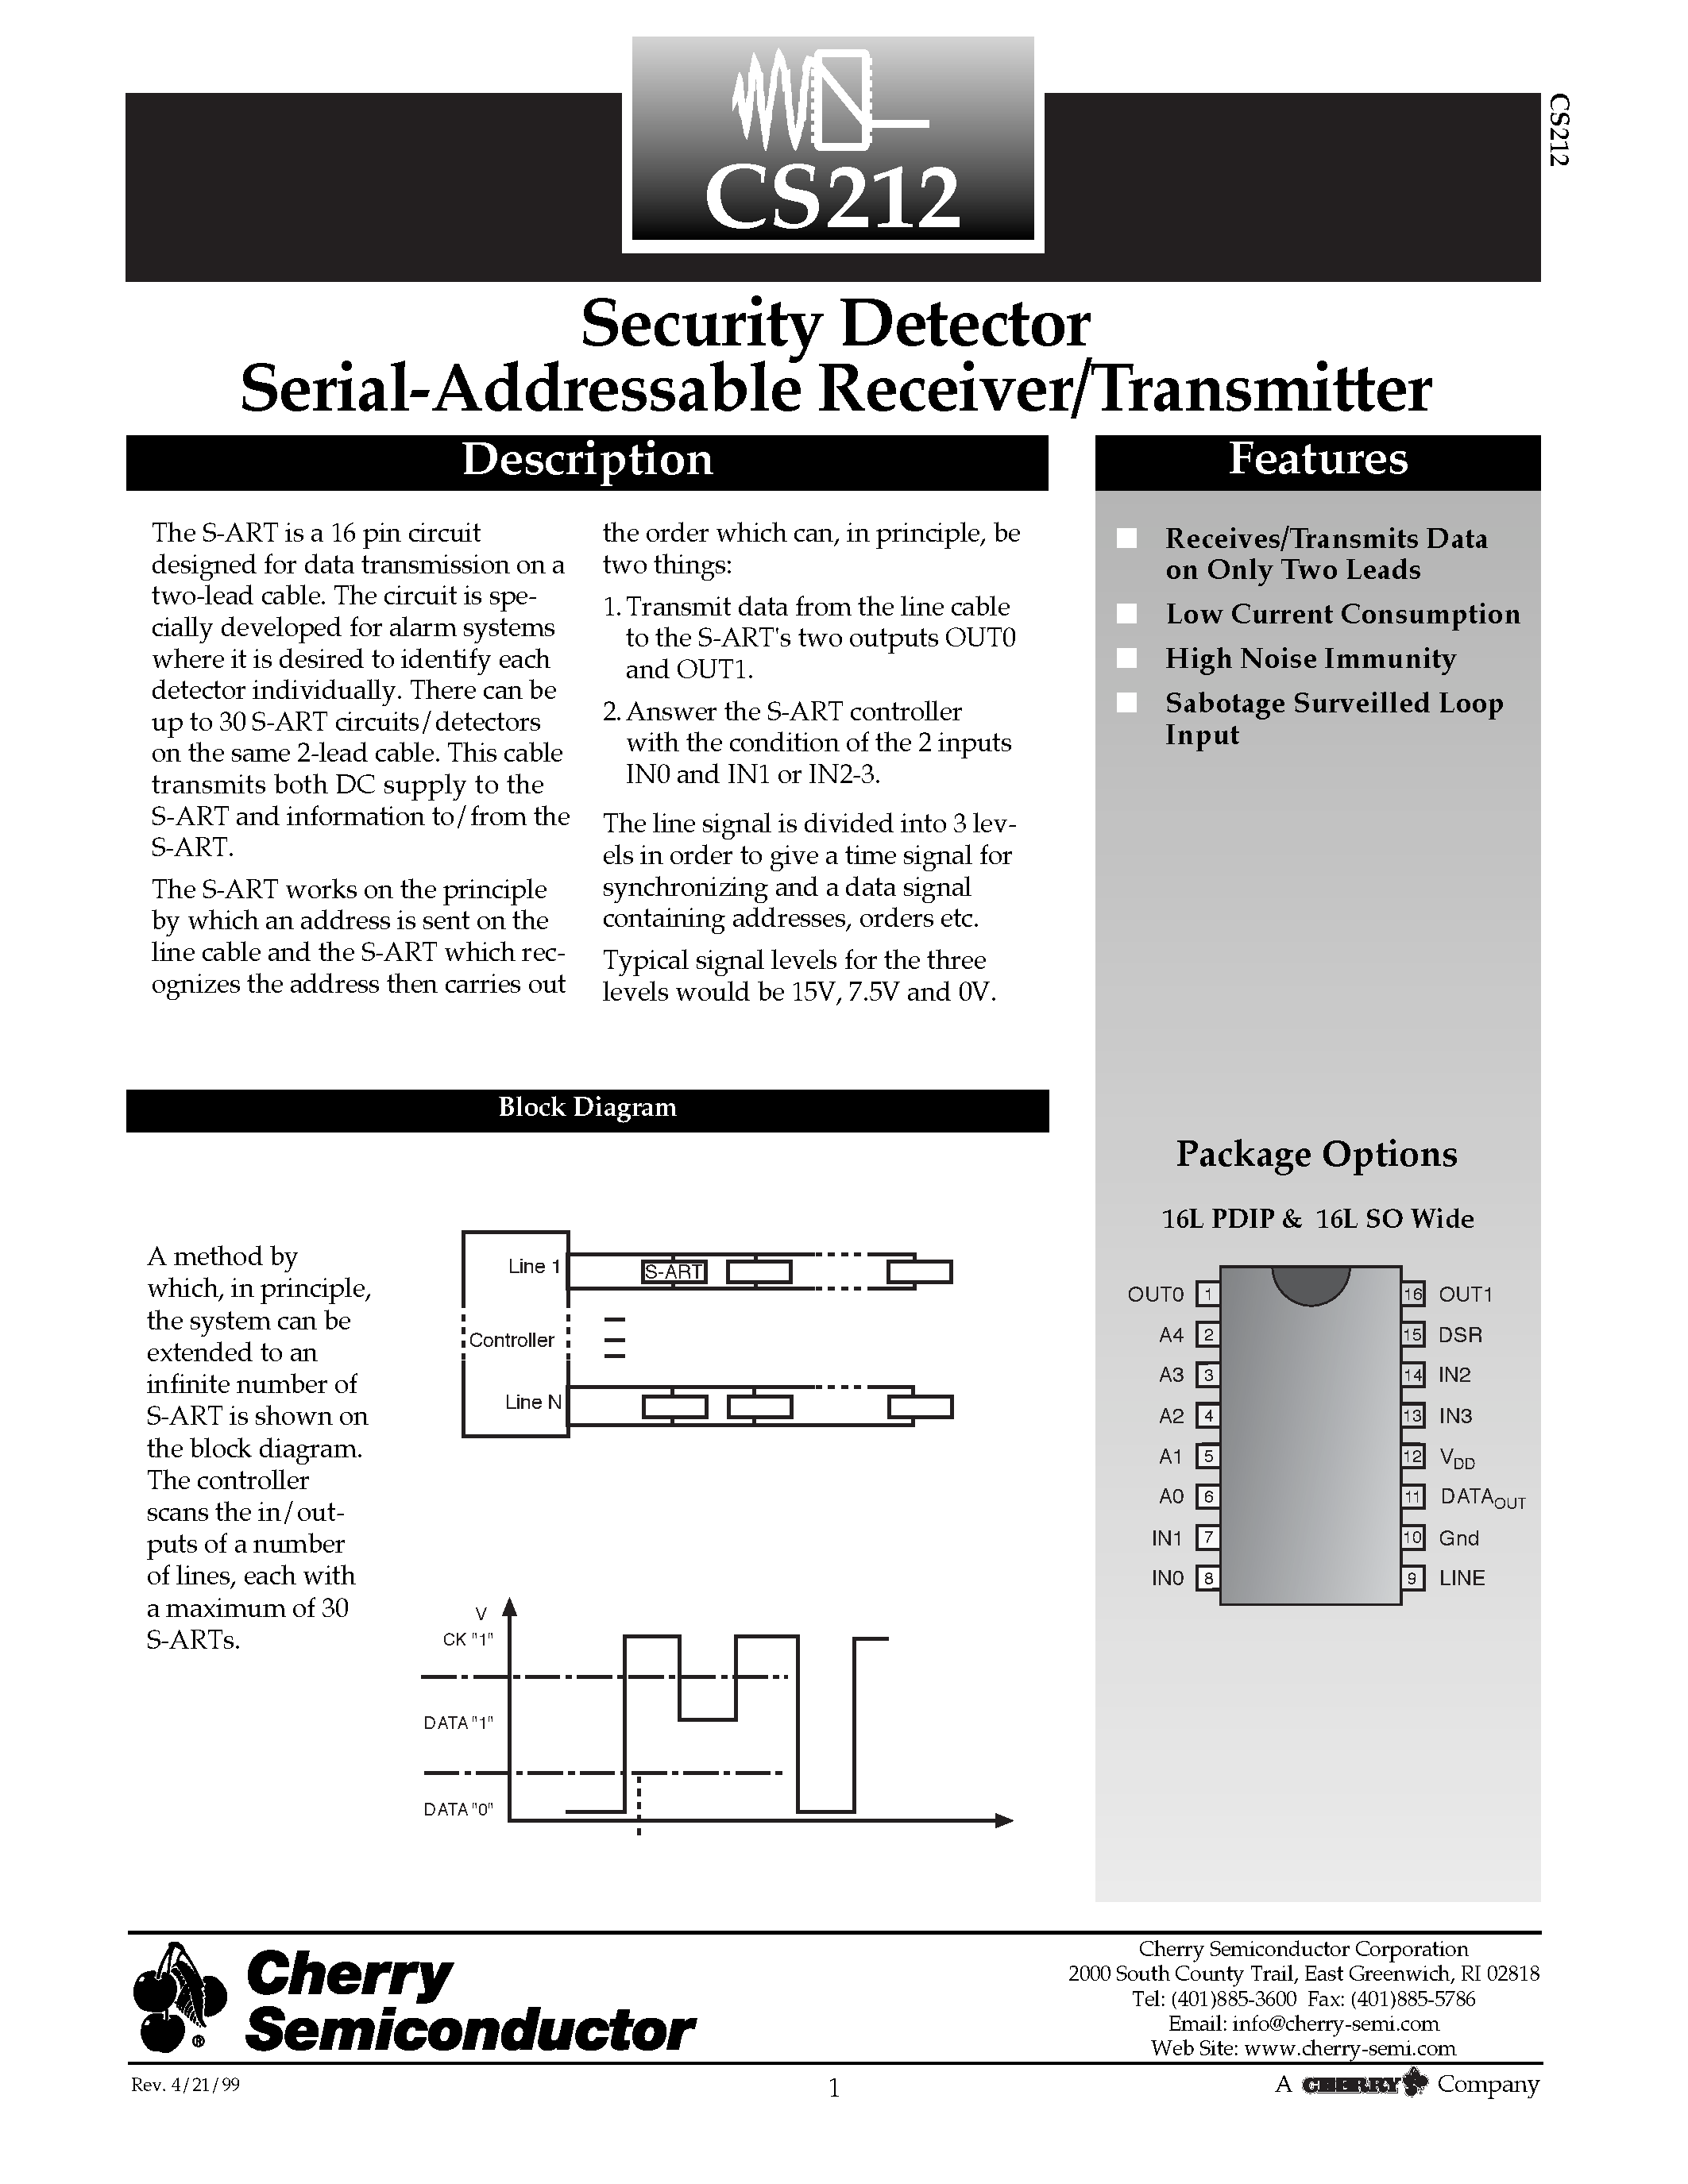 Datasheet CS212 - Security Detector Serial-Addressable Receiver/Transmitter page 1